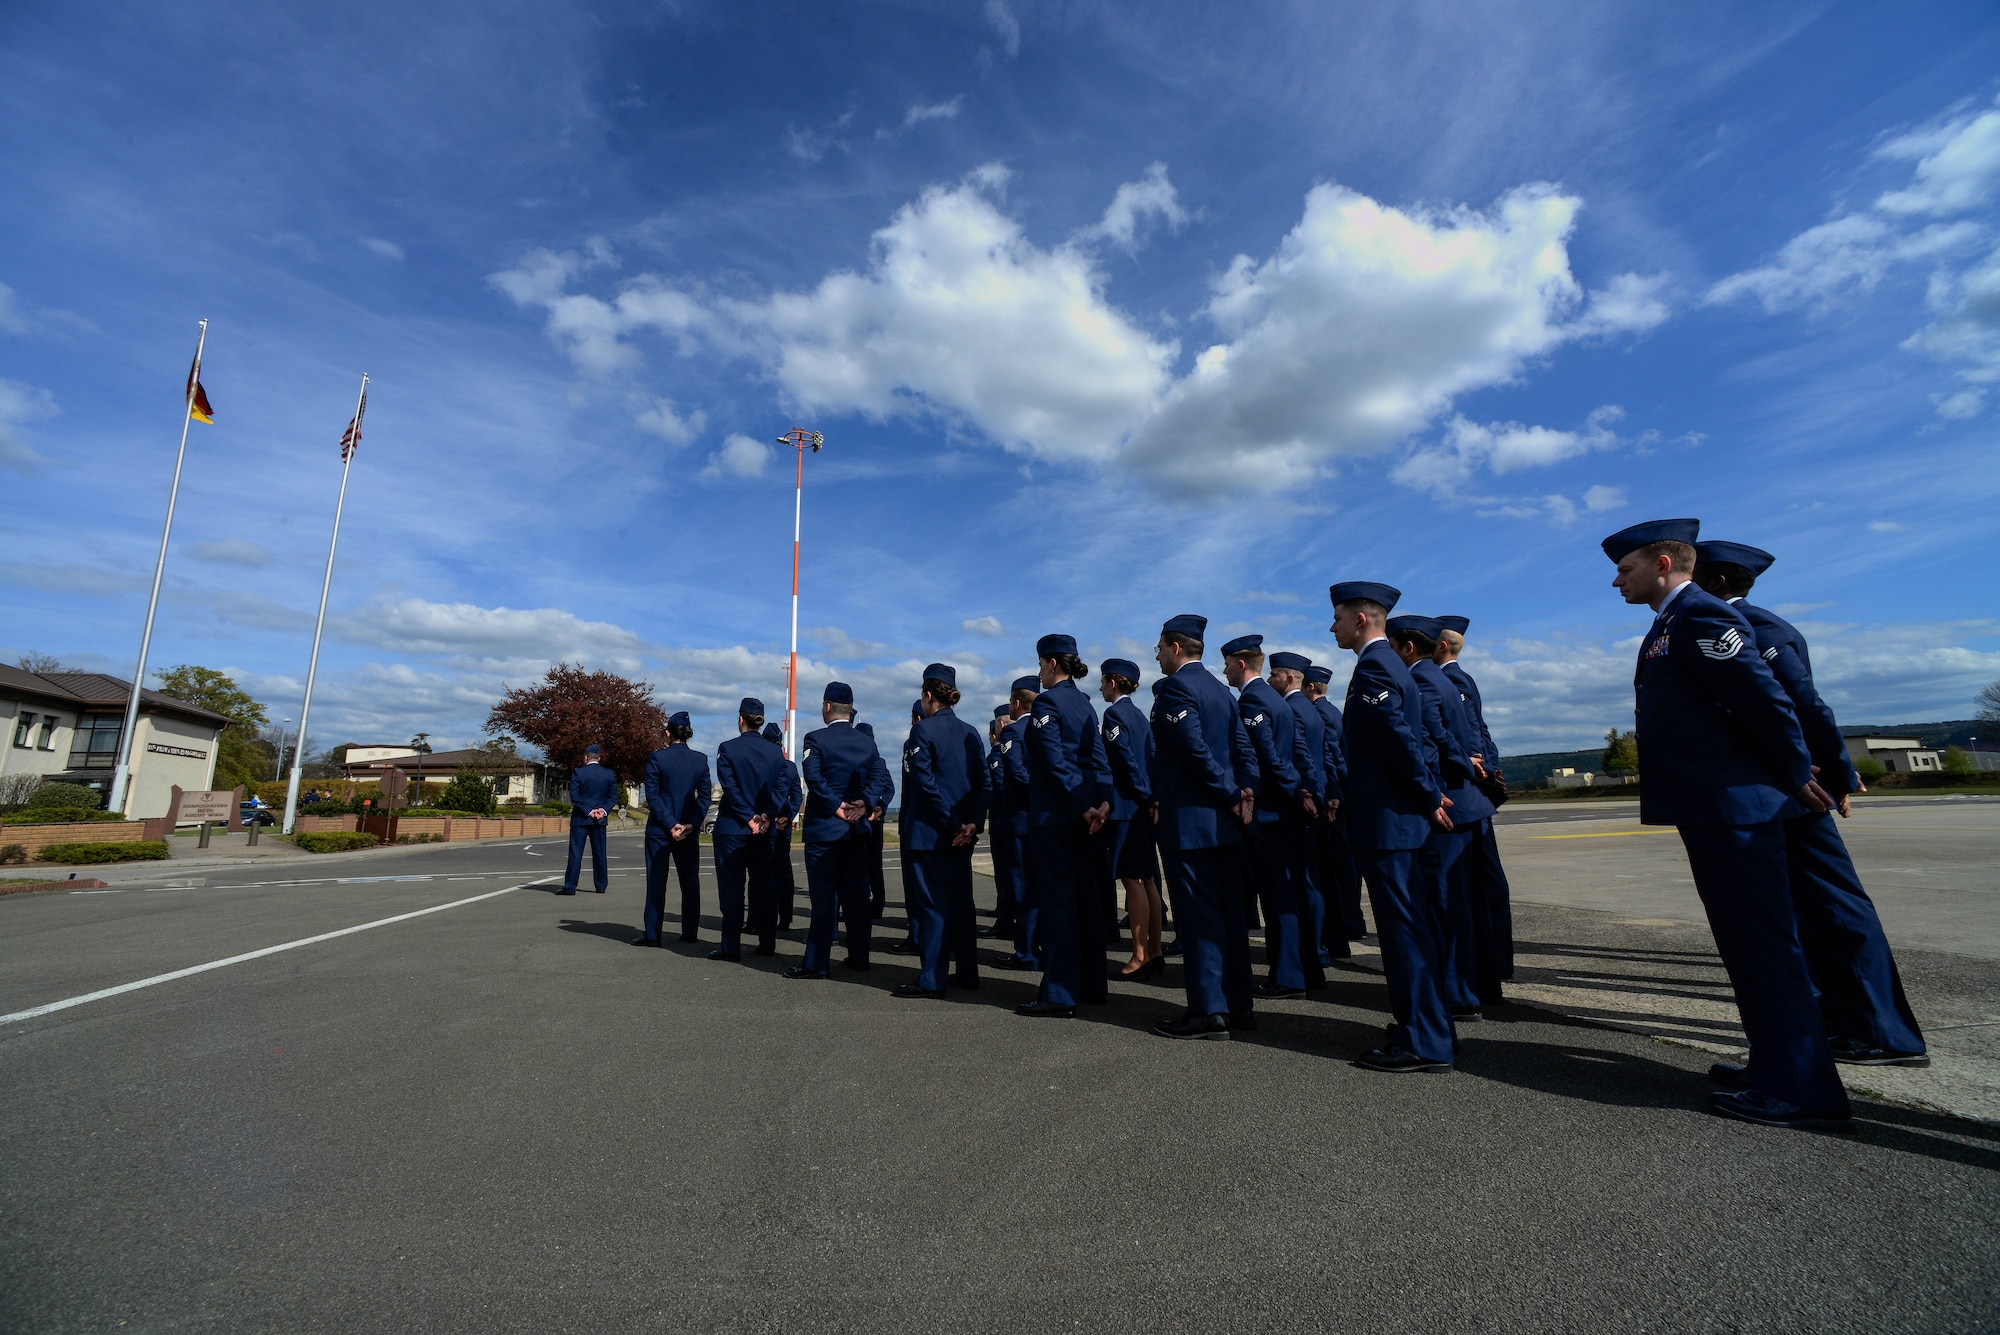 Airmen from the 86th Operations Group stand in a formation before a retreat and remembrance ceremony April 29, 2016, at Ramstein Air Base, Germany.  Airmen from the 86th OG gathered for the ceremony to recognize the Implementation Force 21 crew from the 76th Airlift Squadron who gave the ultimate sacrifice 20 years ago when their aircraft was lost during an approach into Dubrovnik, Croatia. (U.S. Air Force photo/Senior Airman Nicole Keim)